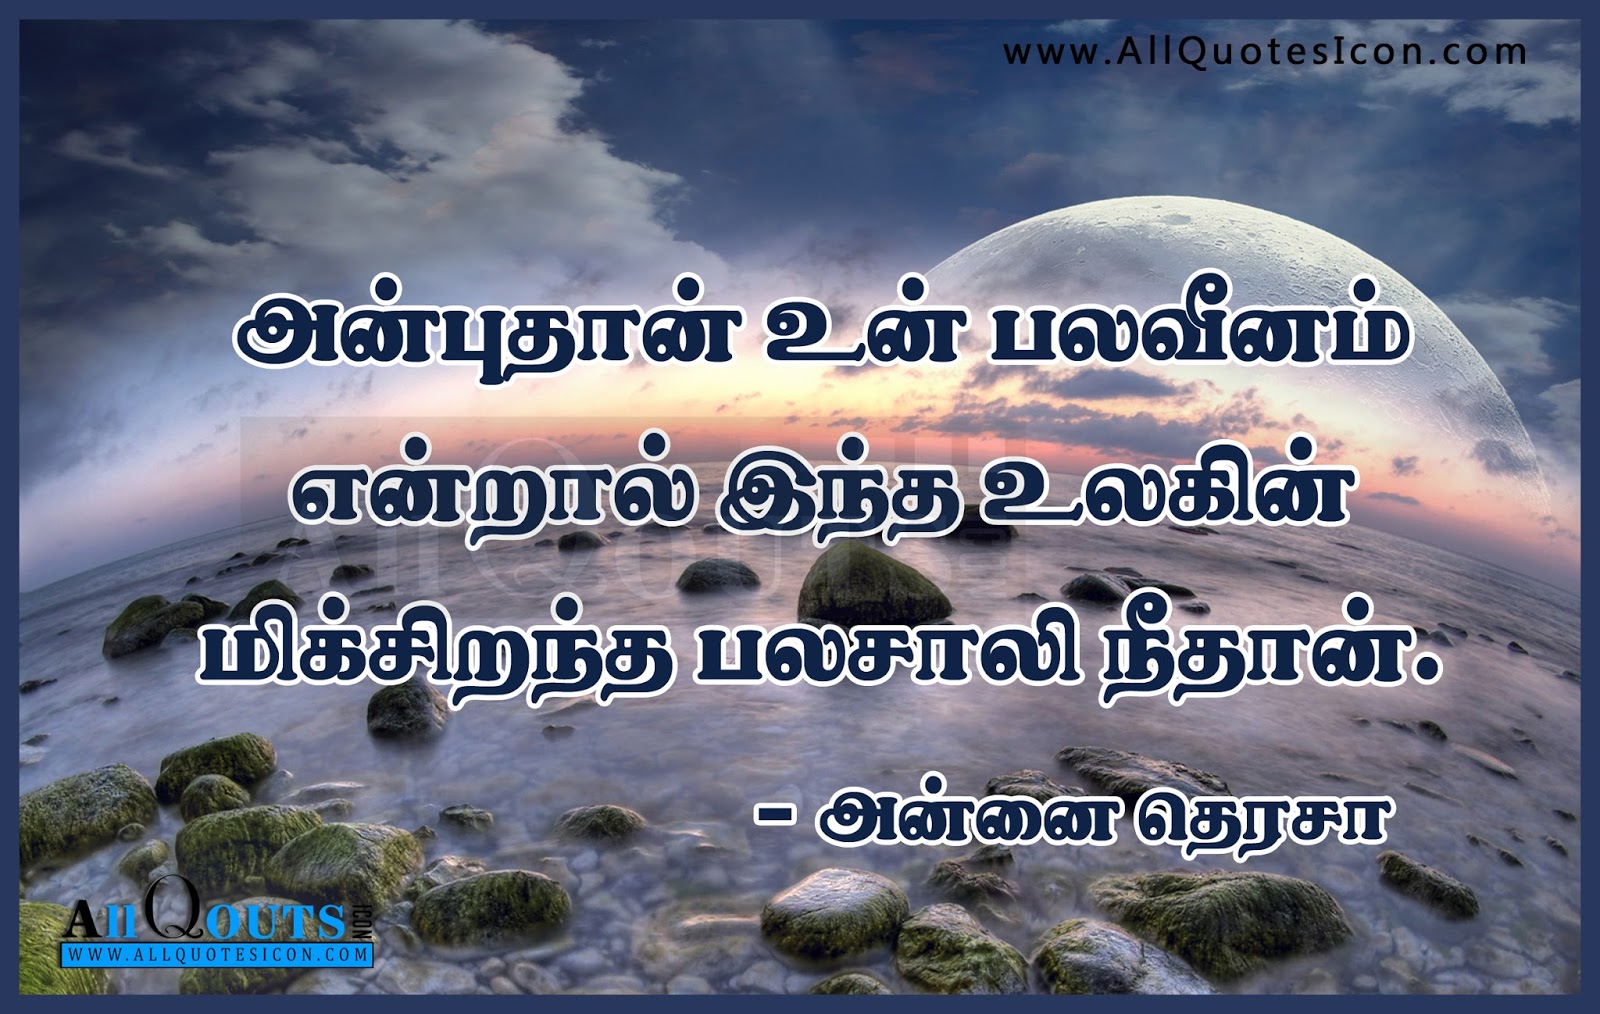 Best Tamil Motivation Quotes And Images Www Allquotesicon Com